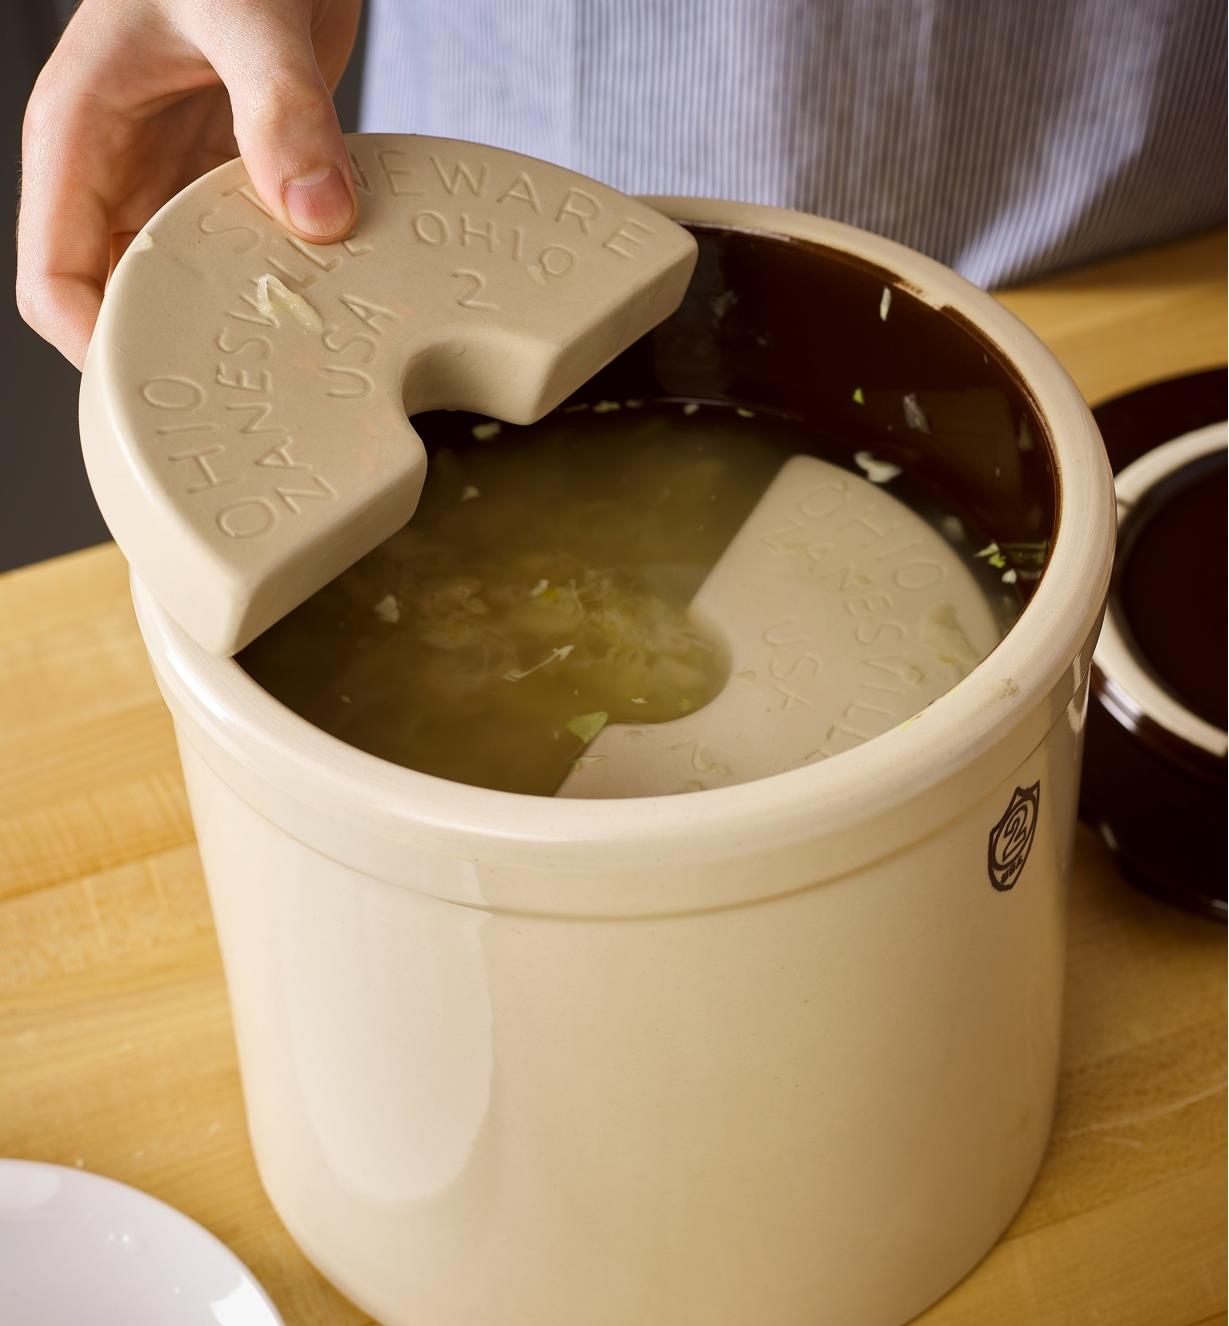 Placing weights on top of ingredients in the fermentation crock